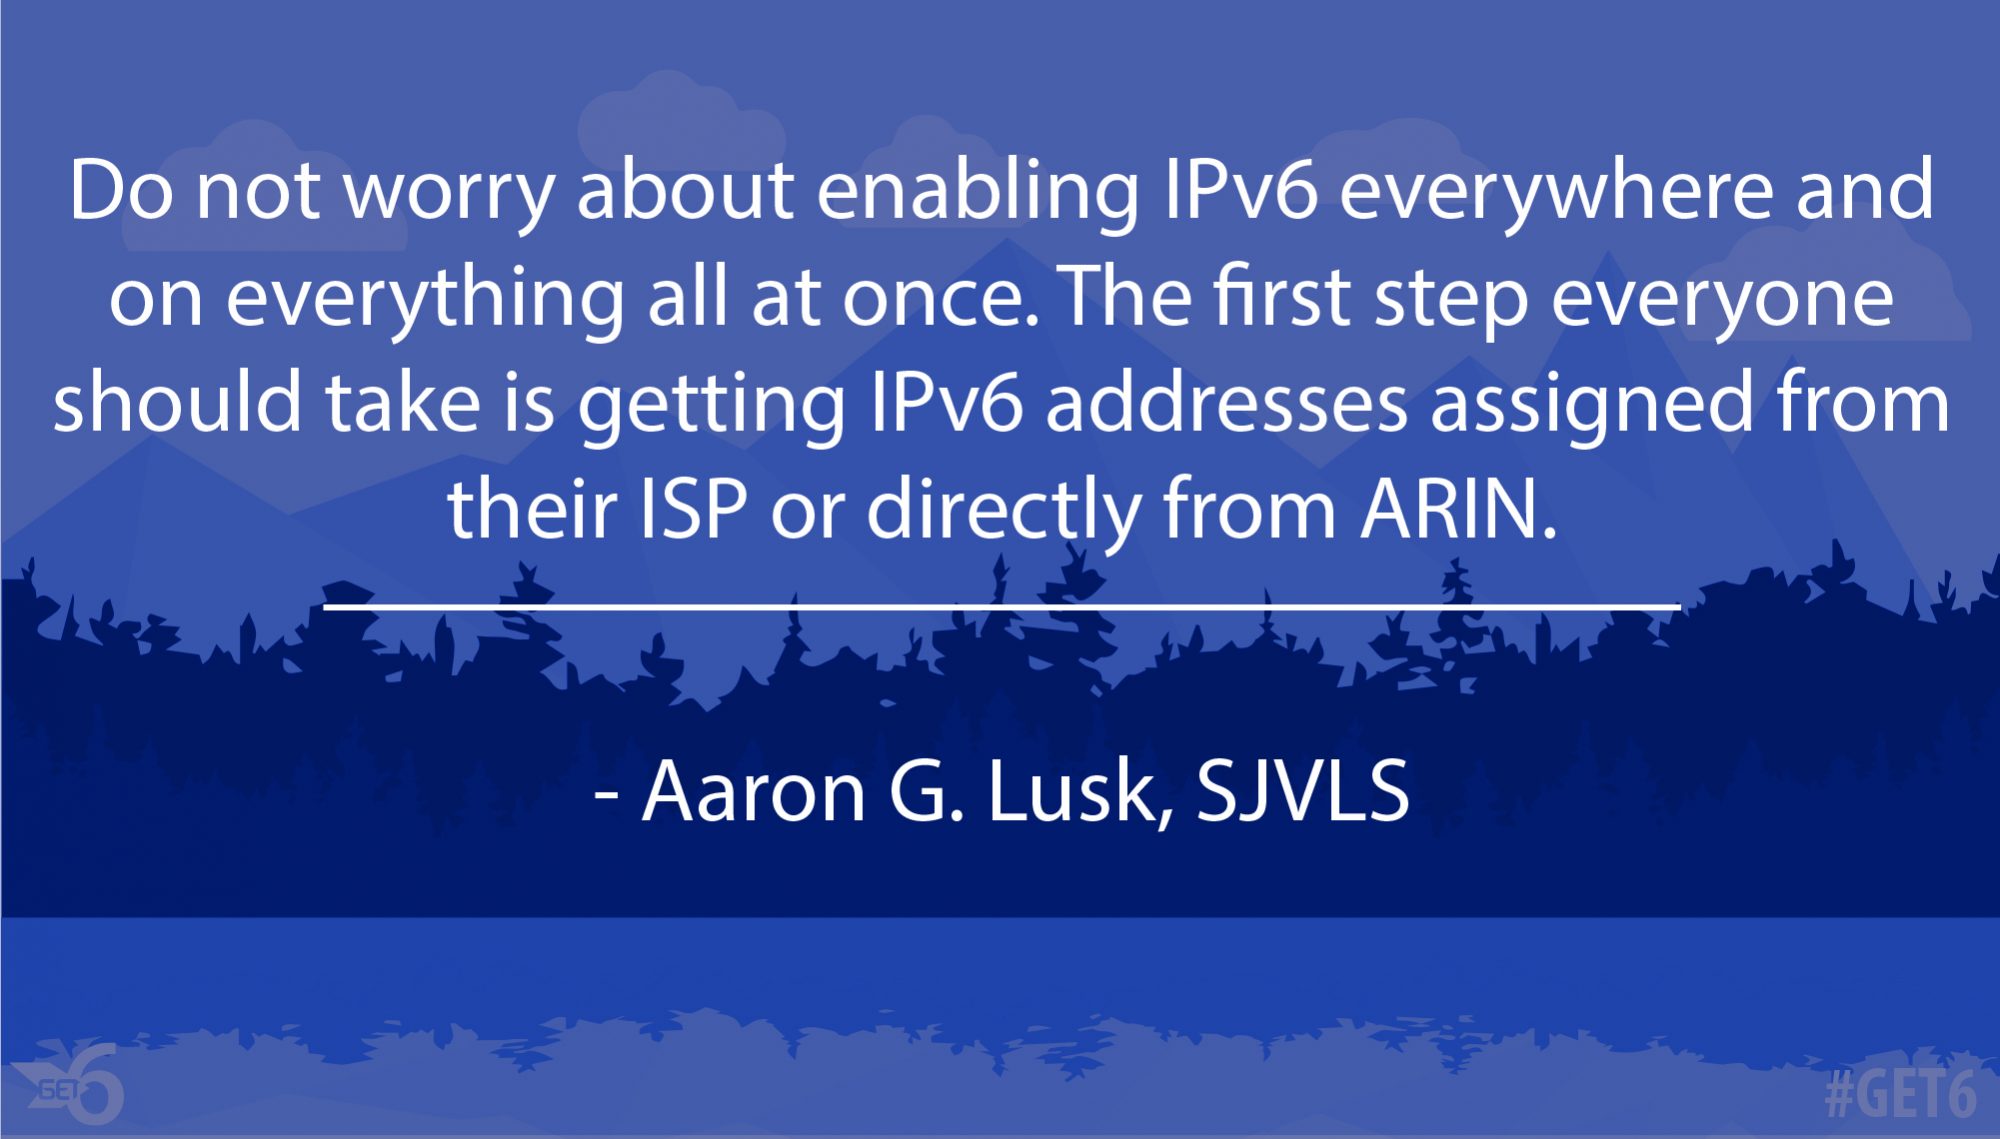 “Do not worry about enabling IPv6 everywhere and on everything all at once.”